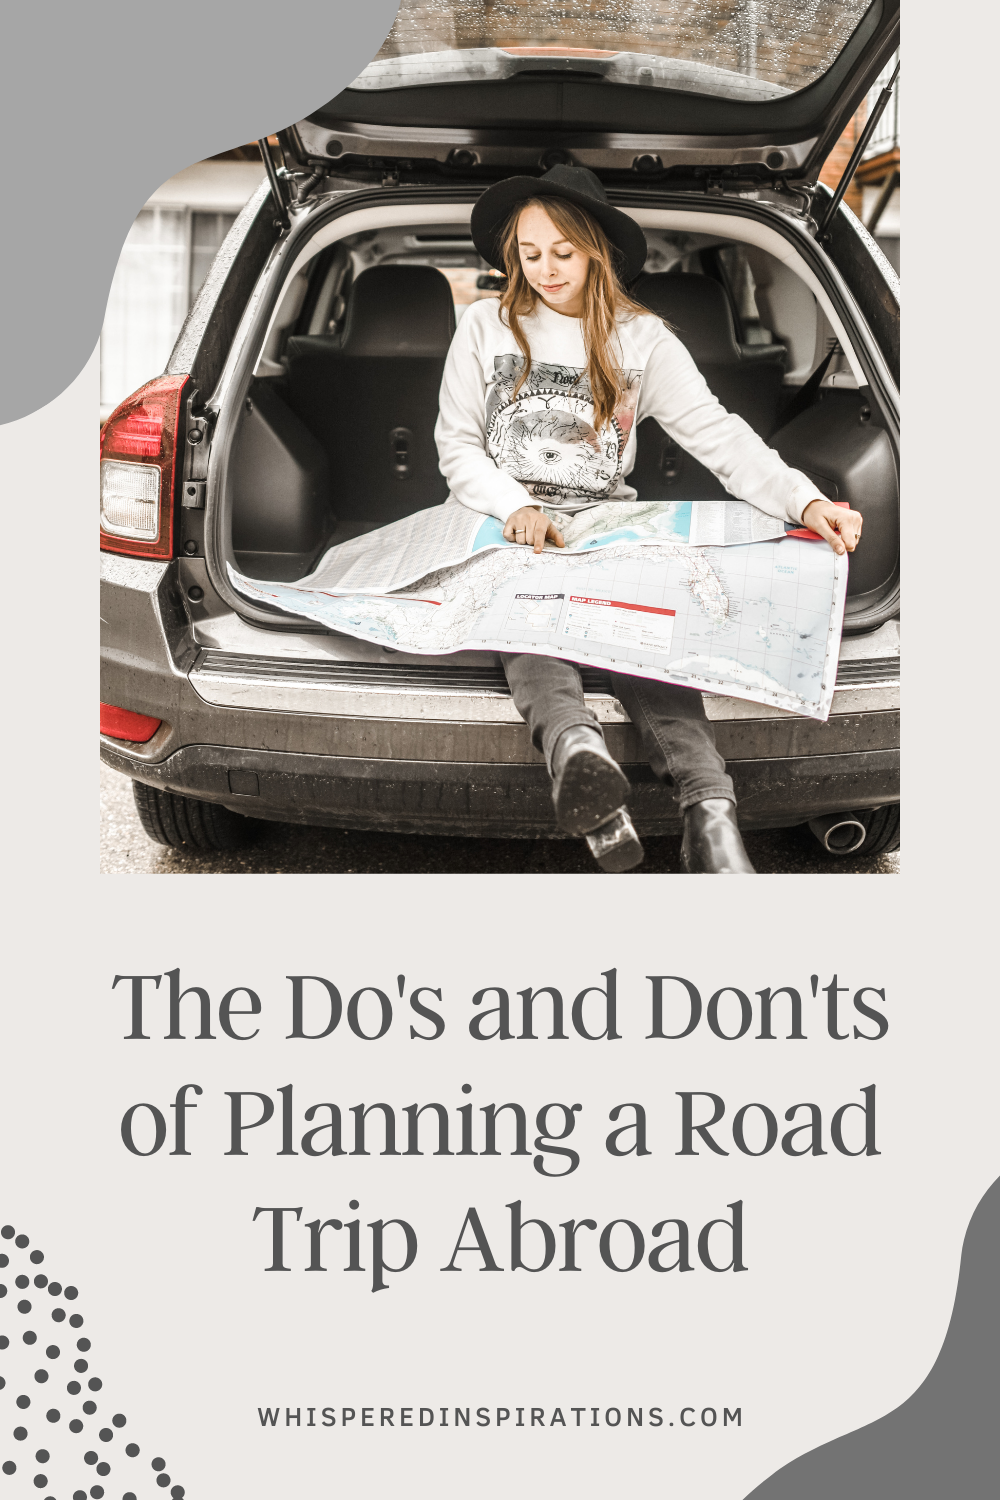 A girl sits in the back of her car holding and reading a map for a road trip. This article covers the do's and don'ts of planning a road trip abroad.